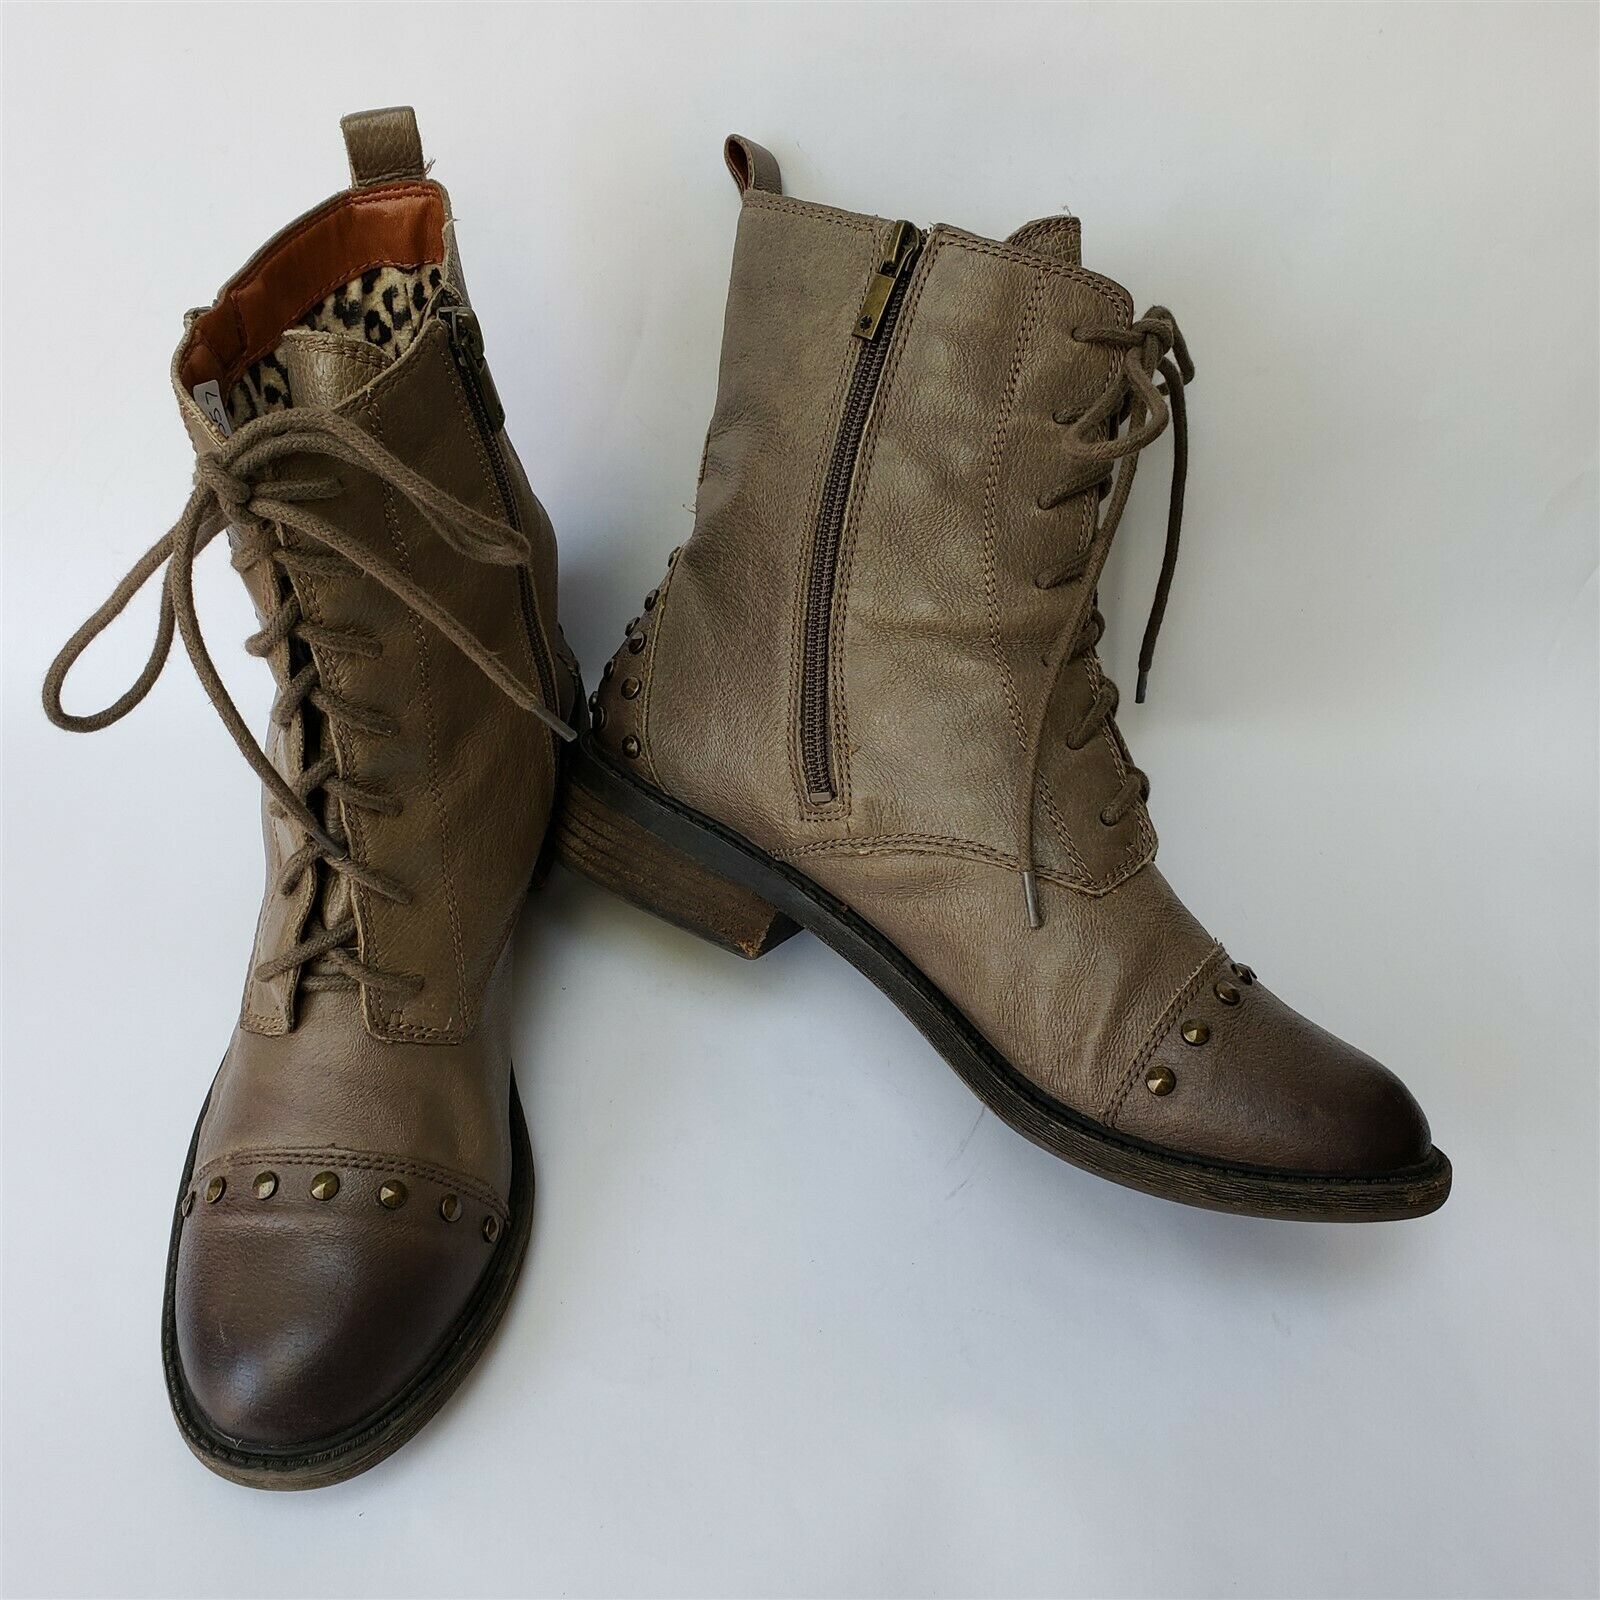 lucky brand women's tibly booties